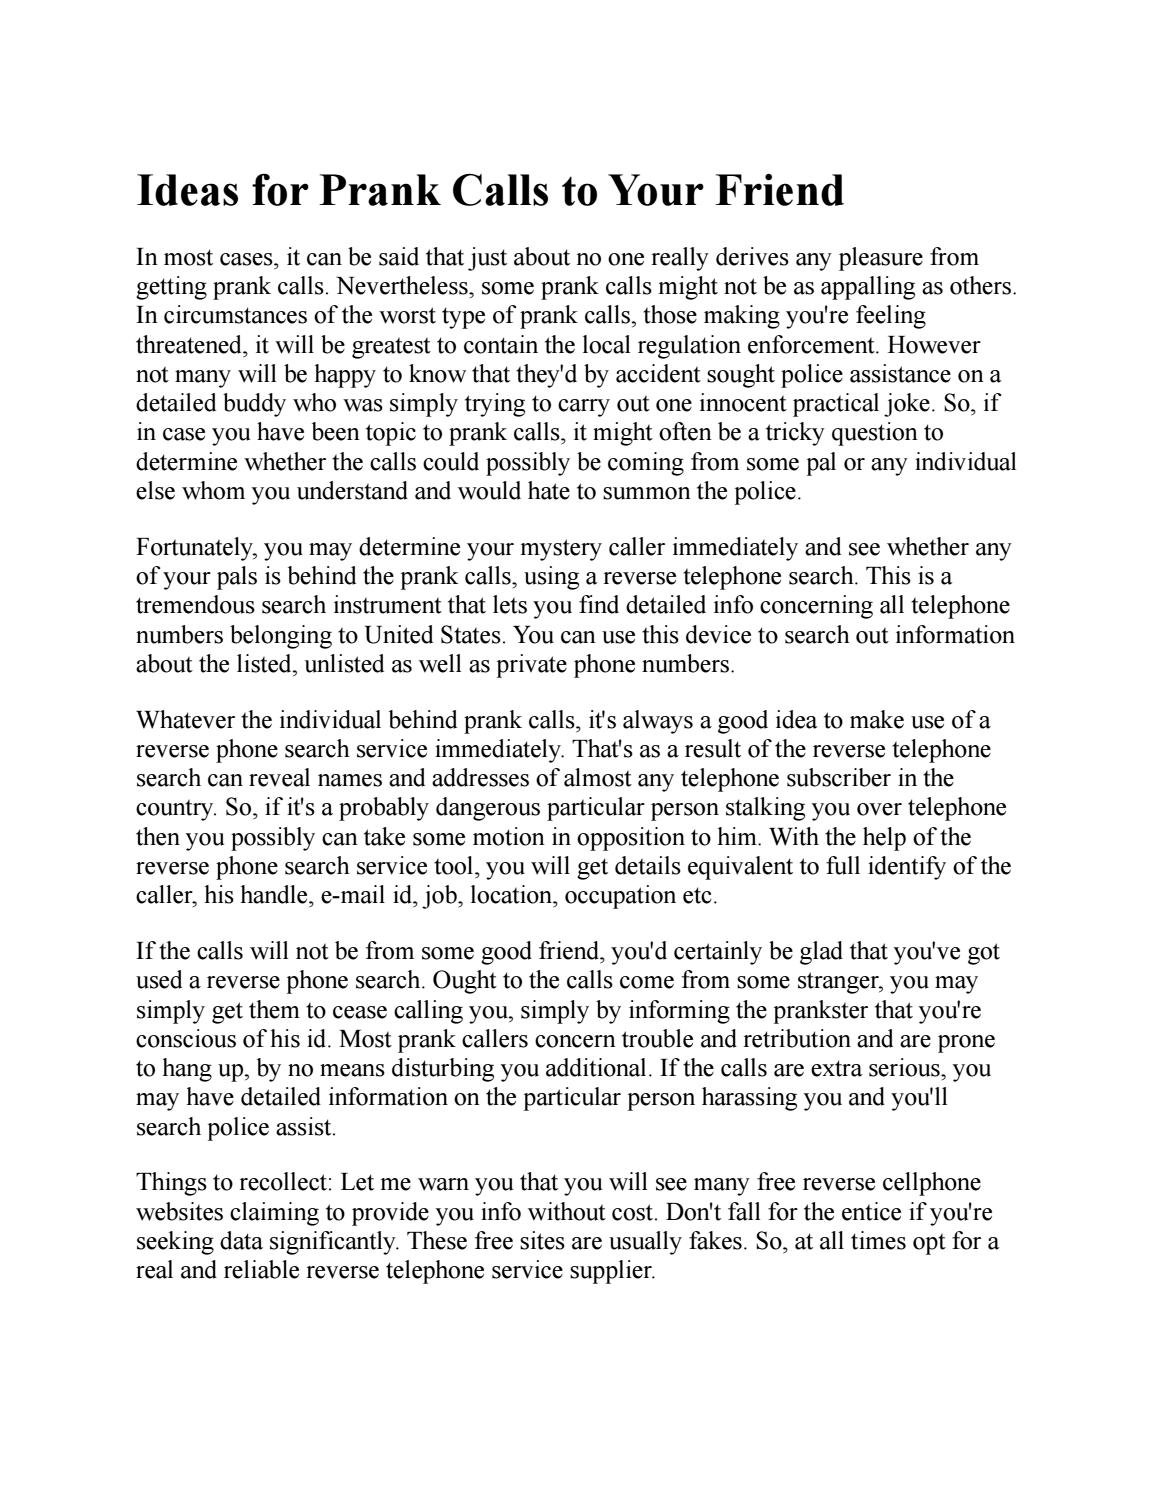 10 Most Recommended Prank Call Ideas For Friends extreme seizure prankextremeseizure issuu 2022